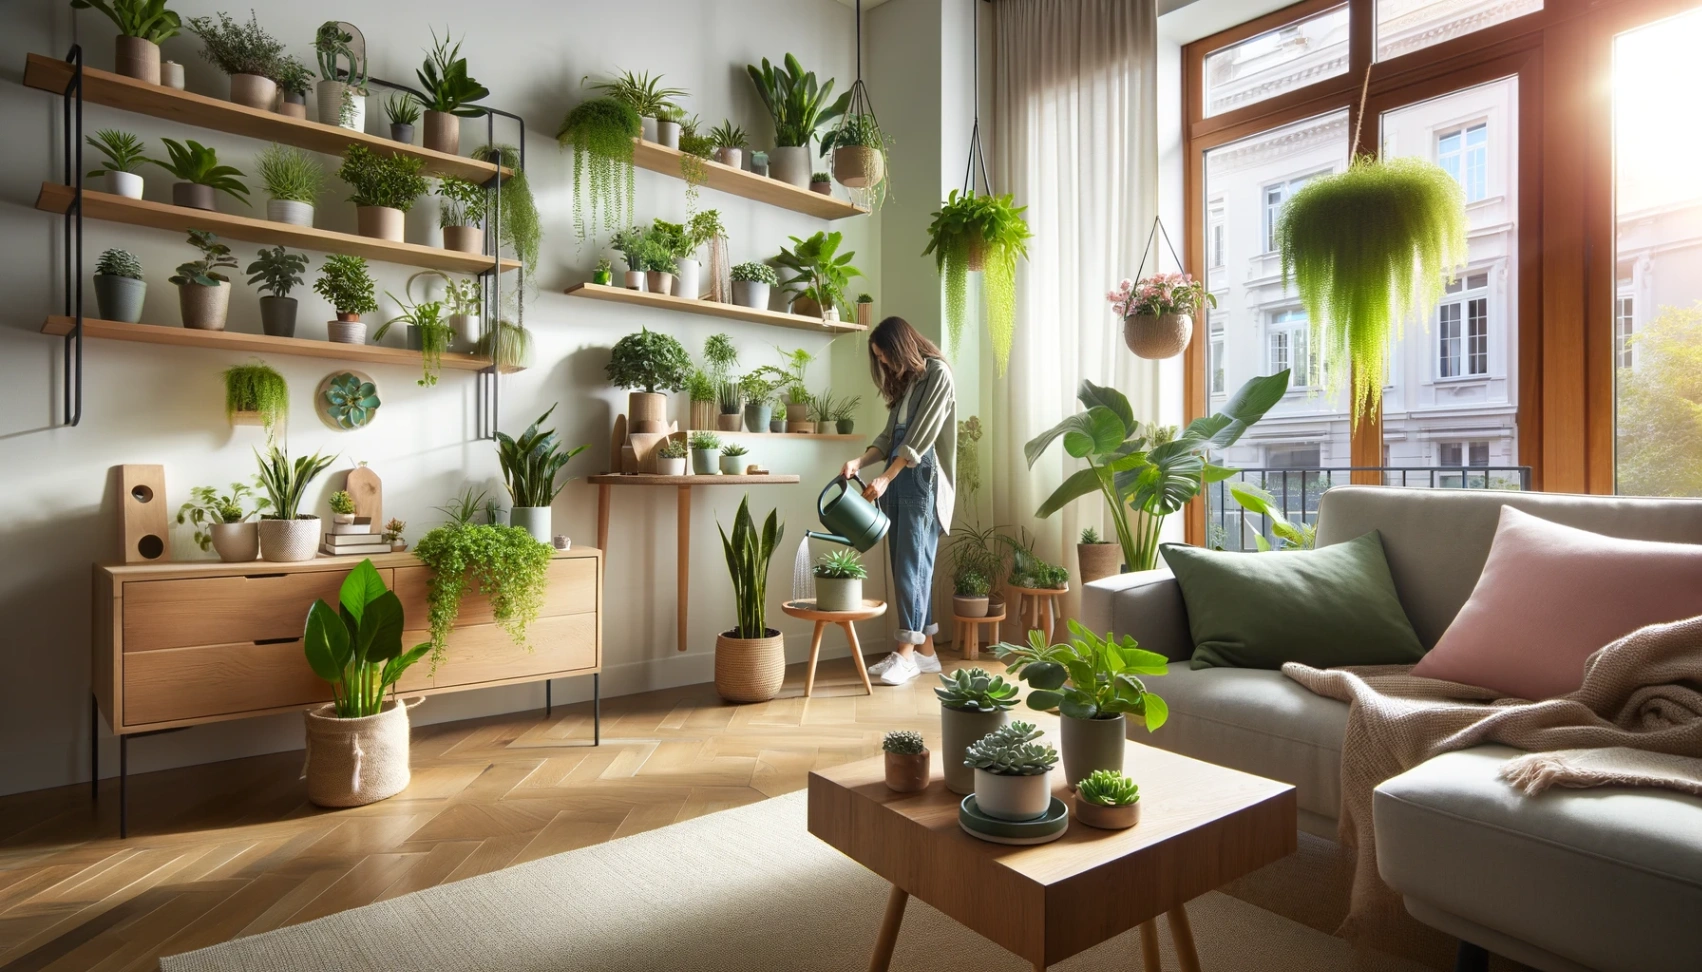 How to Care for Plants in Apartments: Step-by-Step Guide